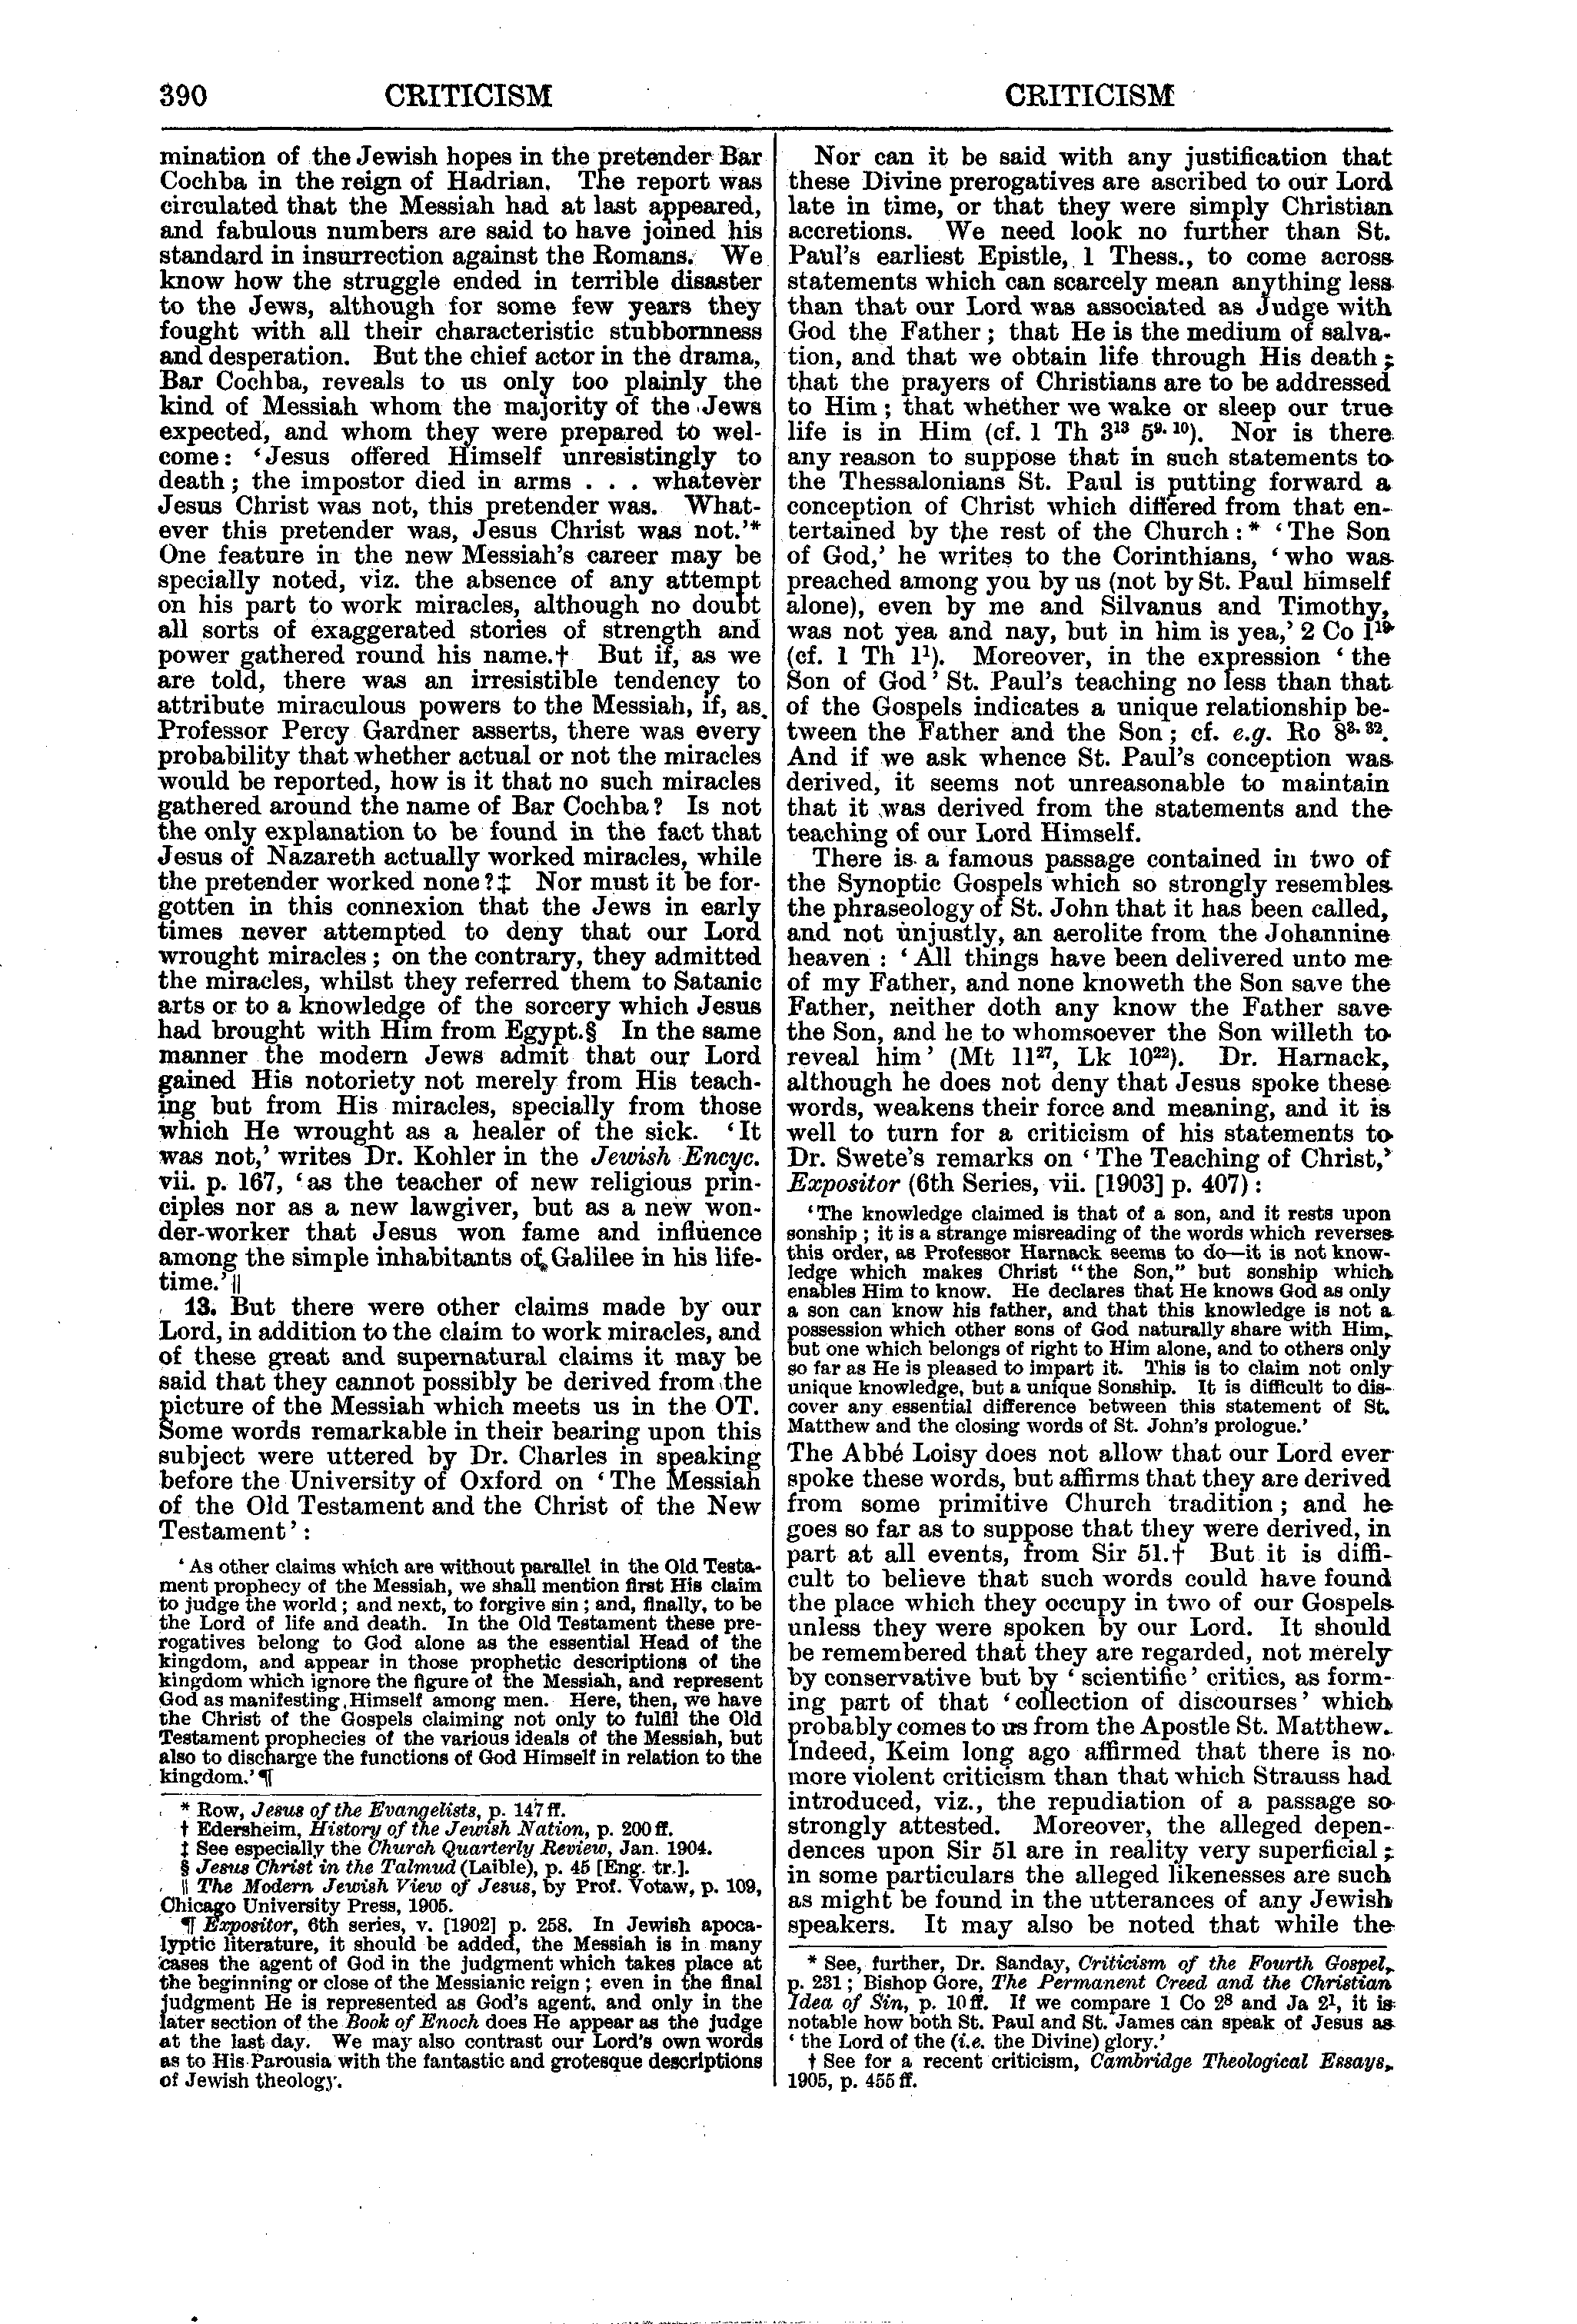 Image of page 390